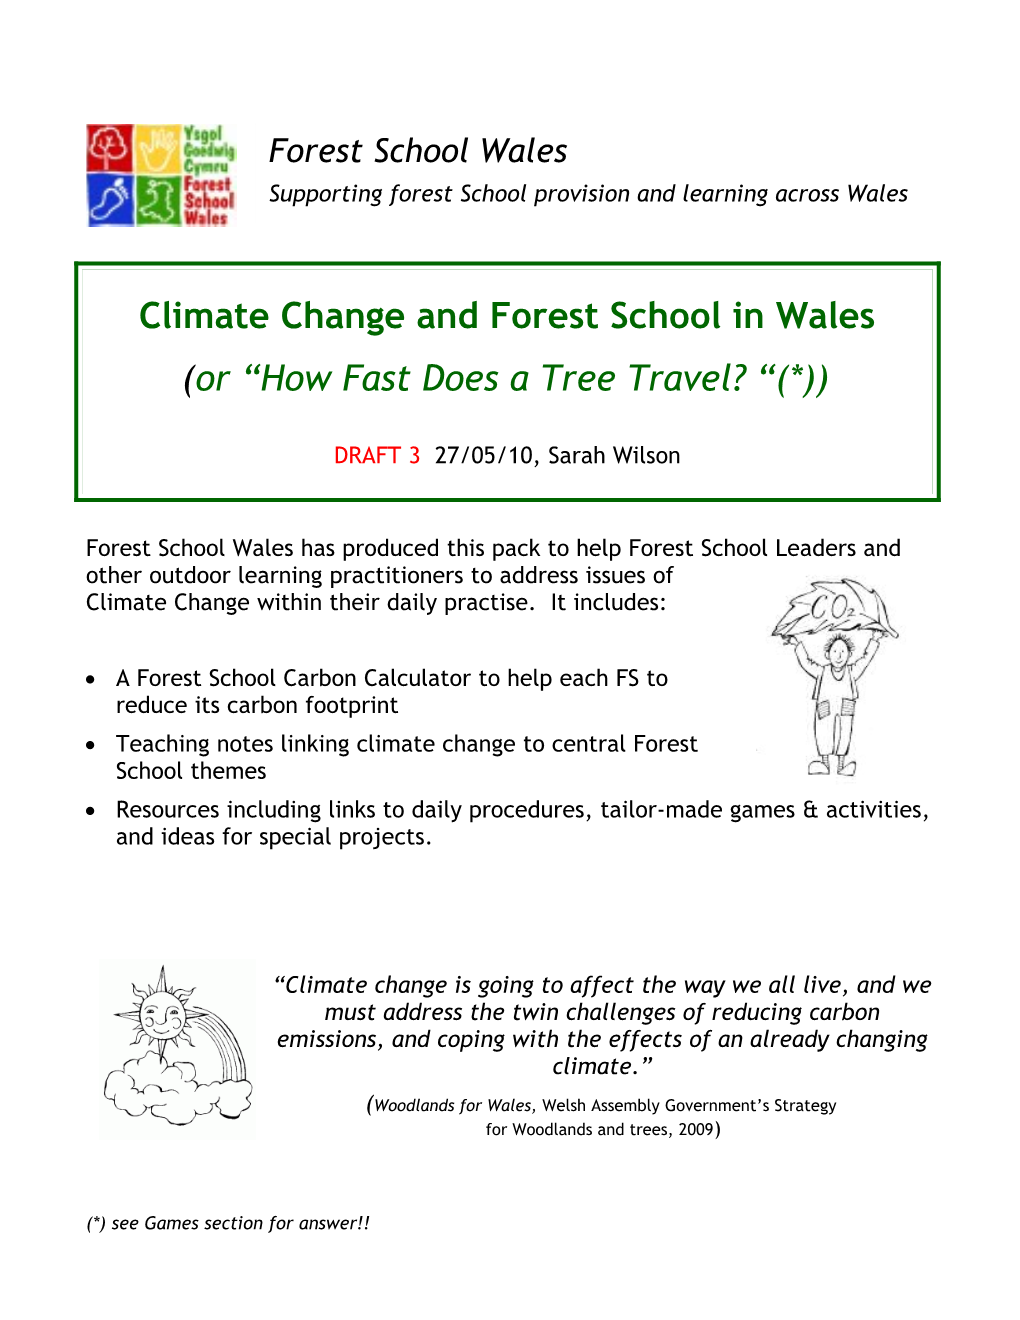 Climate Change and Forest School in Wales. Draft 3